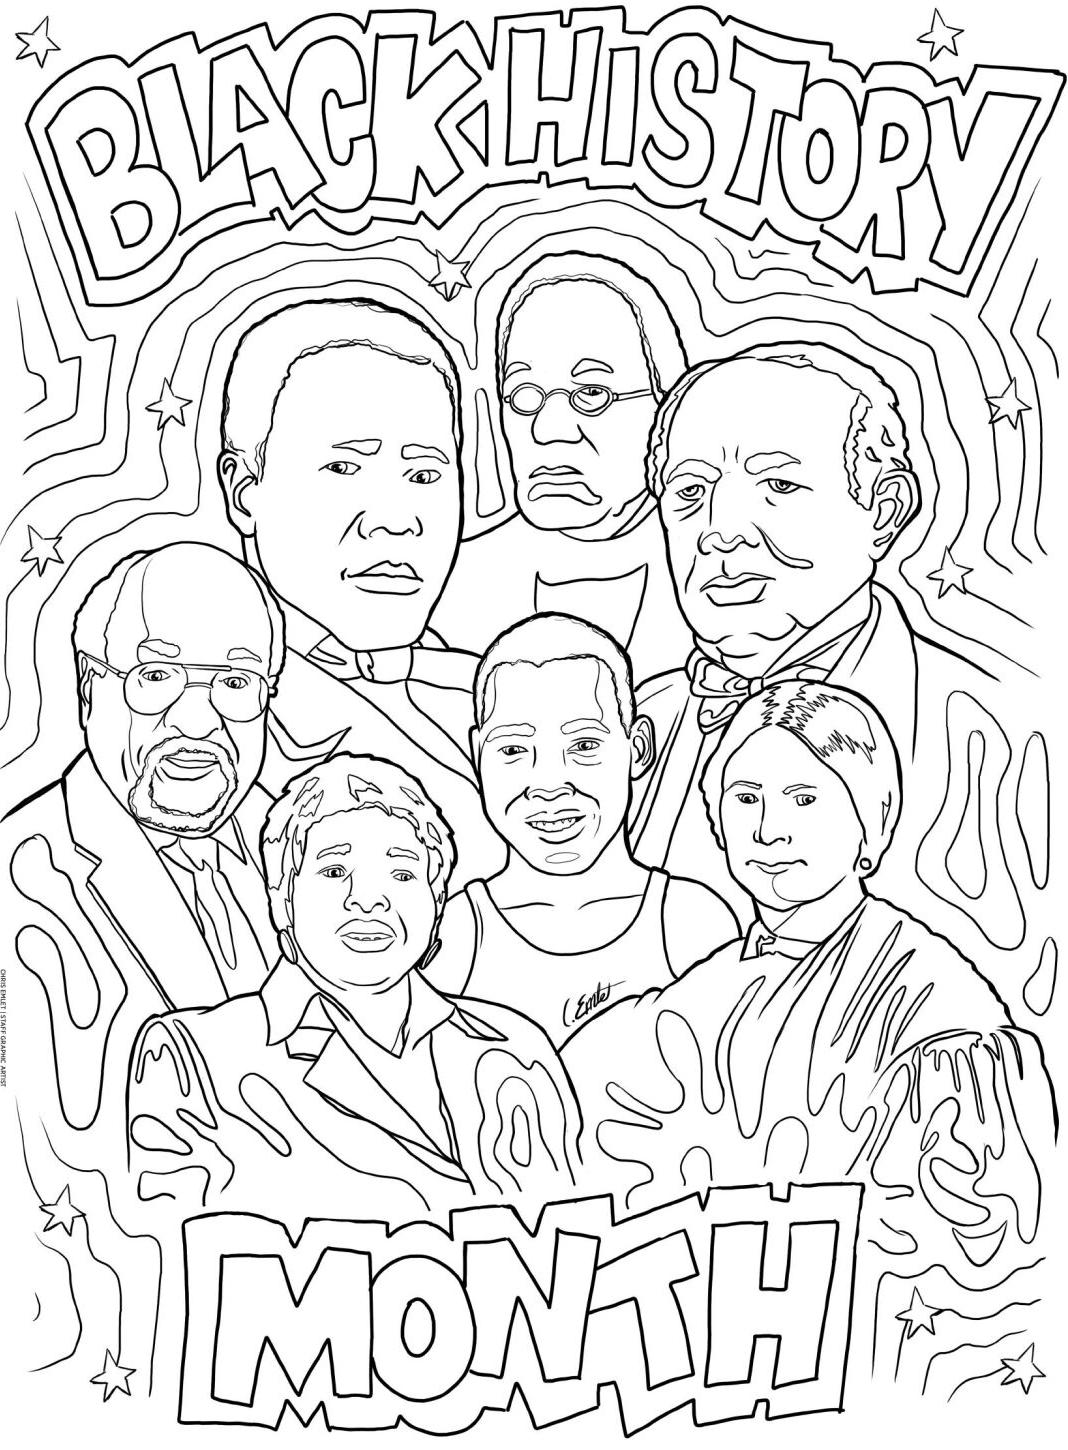 Celebrate Black History Month: Download a coloring page featuring  extraordinary Black individuals from Lancaster | Local News |  lancasteronline.com